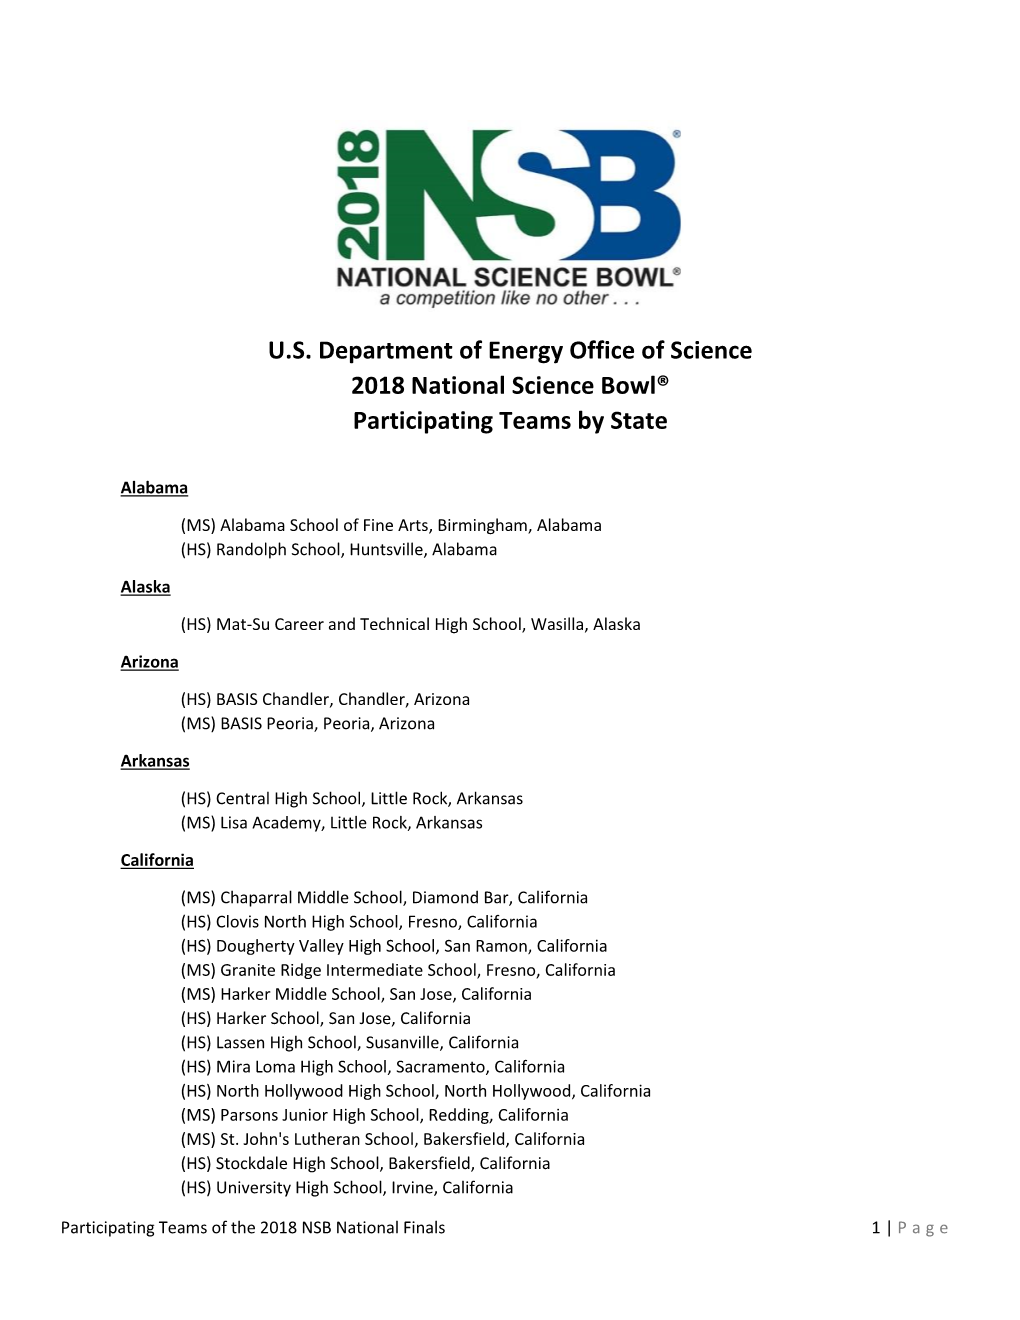 U.S. Department of Energy Office of Science 2018 National Science Bowl® Participating Teams by State